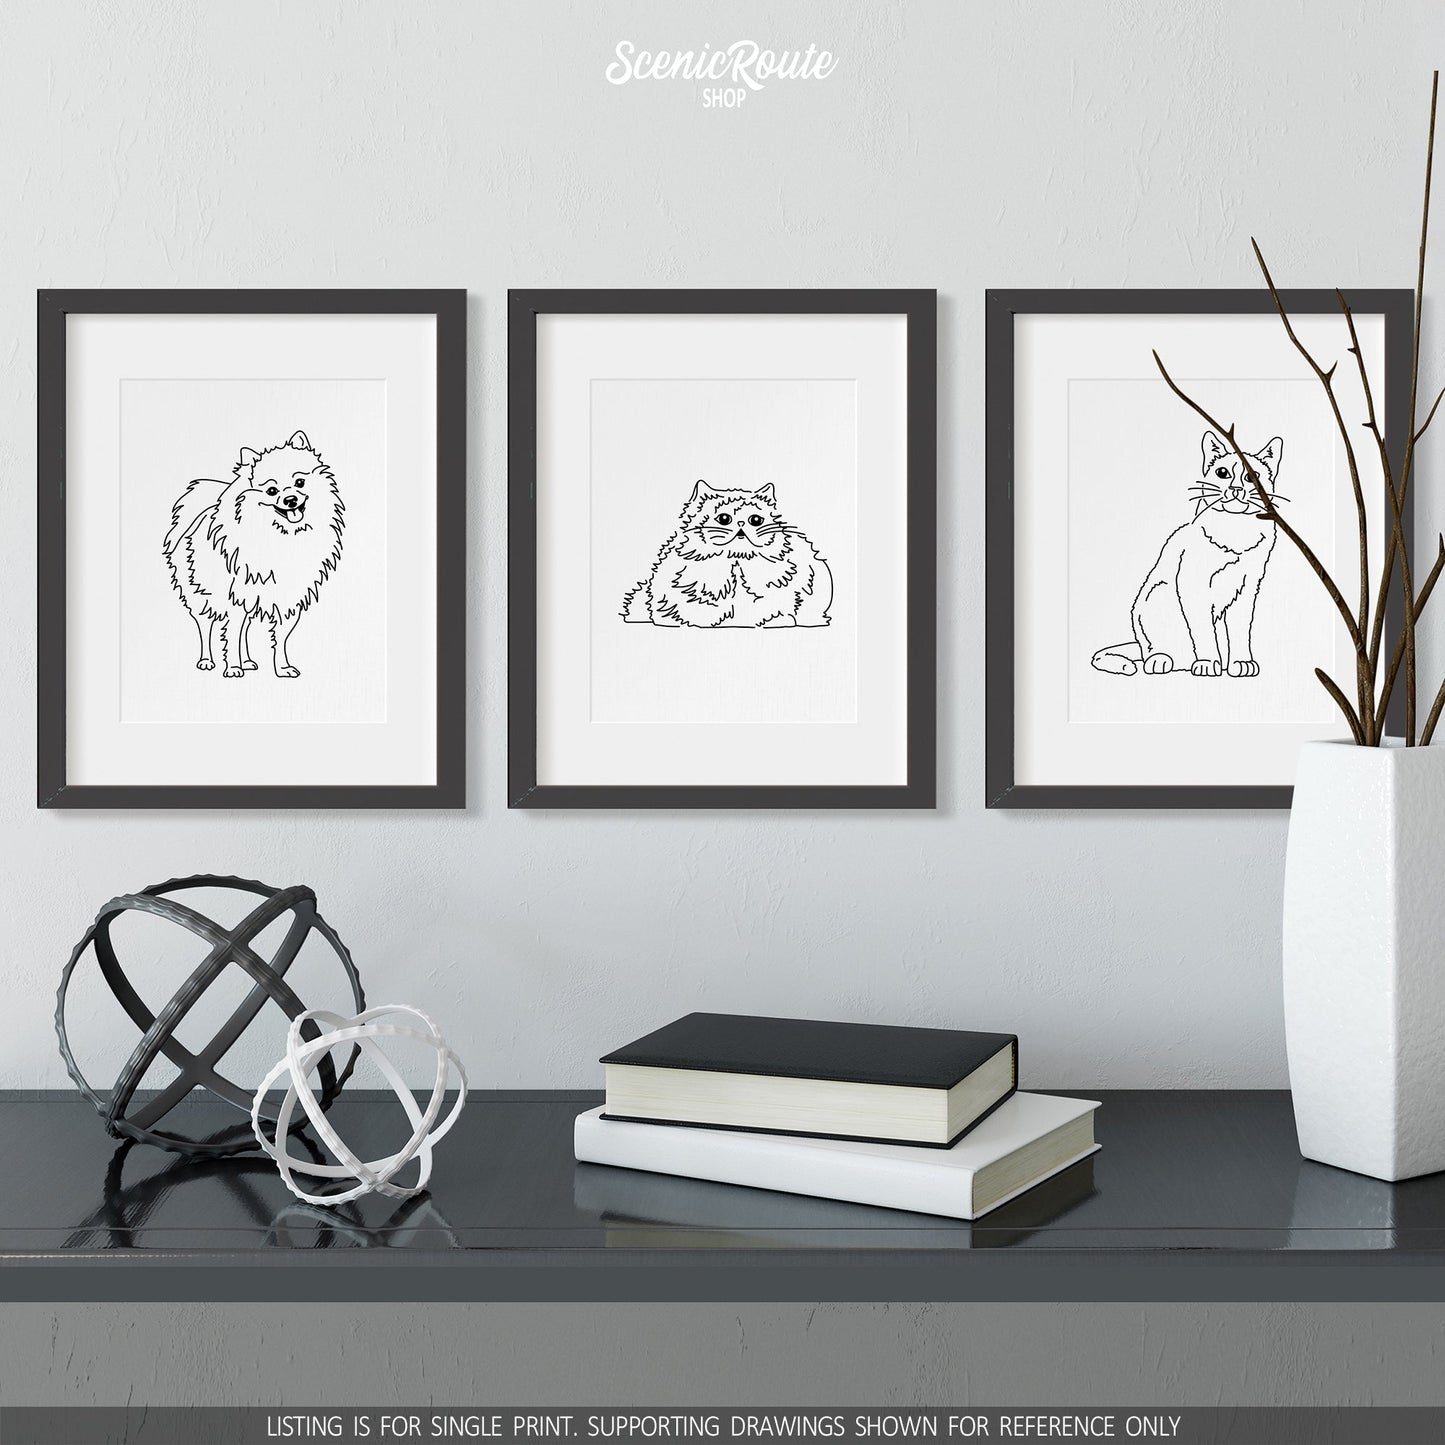 A group of three framed drawings on a wall above a dresser with books and figurines. The line art drawings include a Pomeranian Dog, a Himalayan cat, and a Snowshoe cat